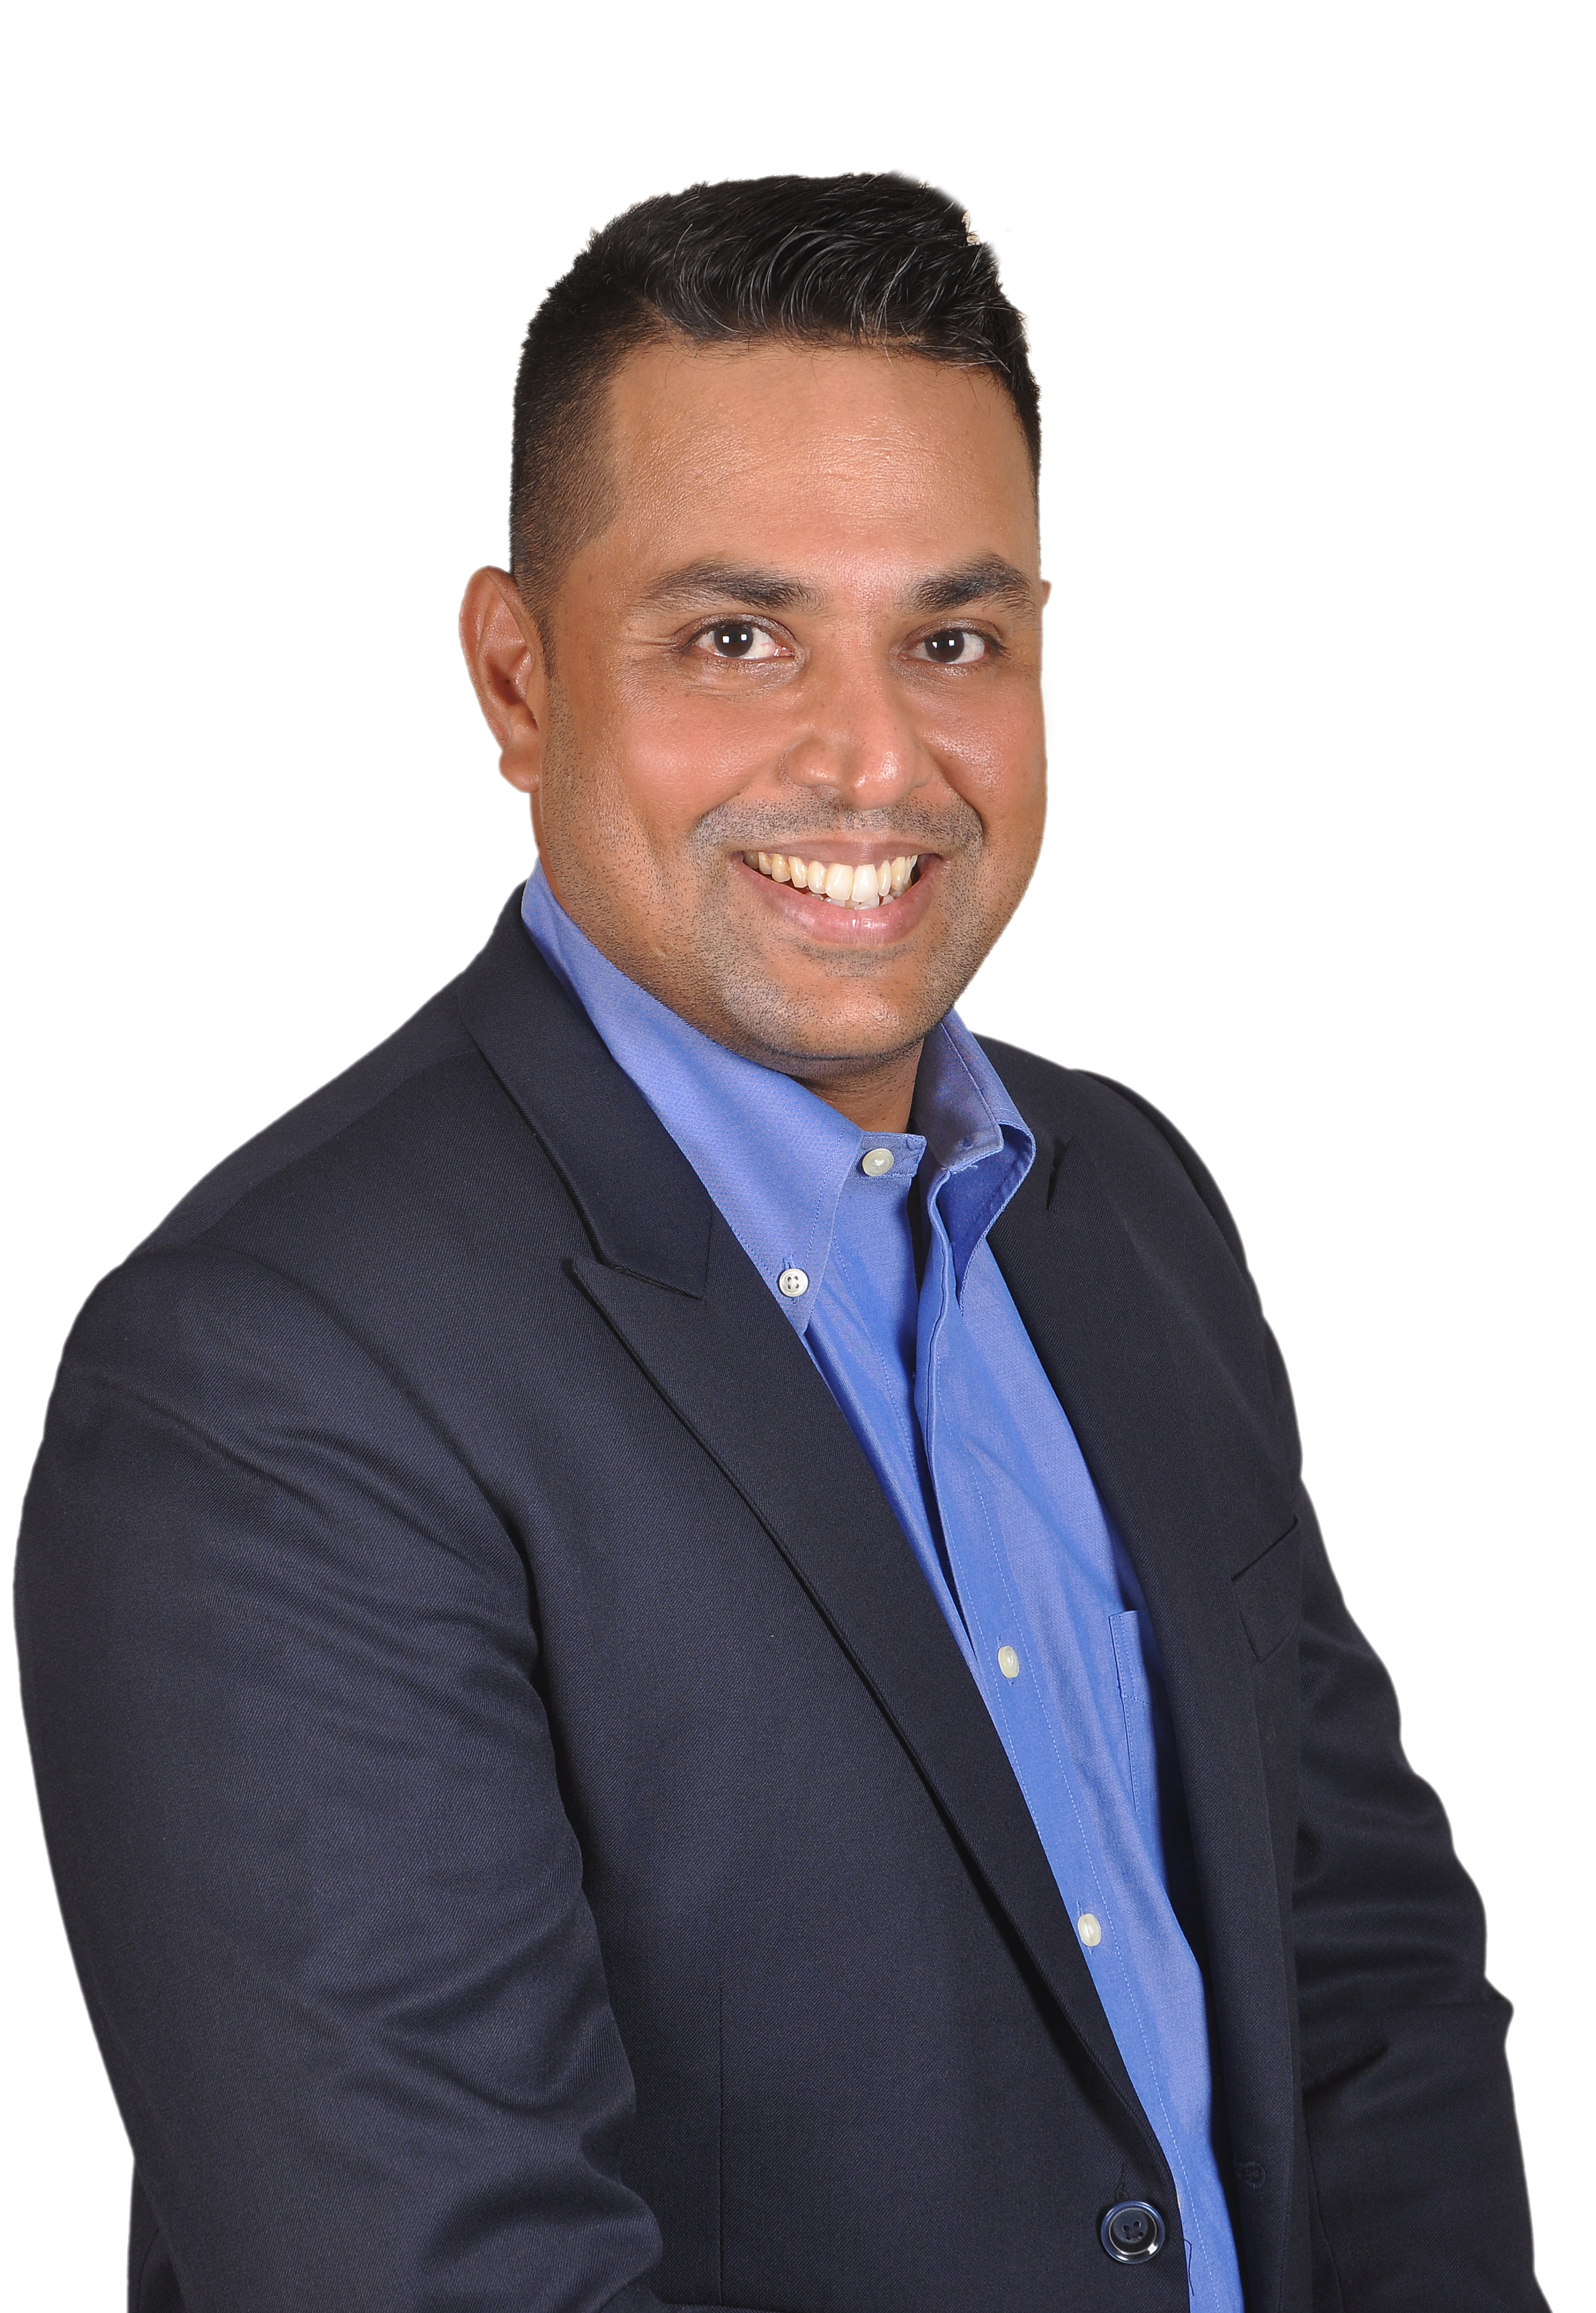 CleverTap Appoints Sidharth Pisharoti as CRO to drive growth across India, META and Asia Pacific